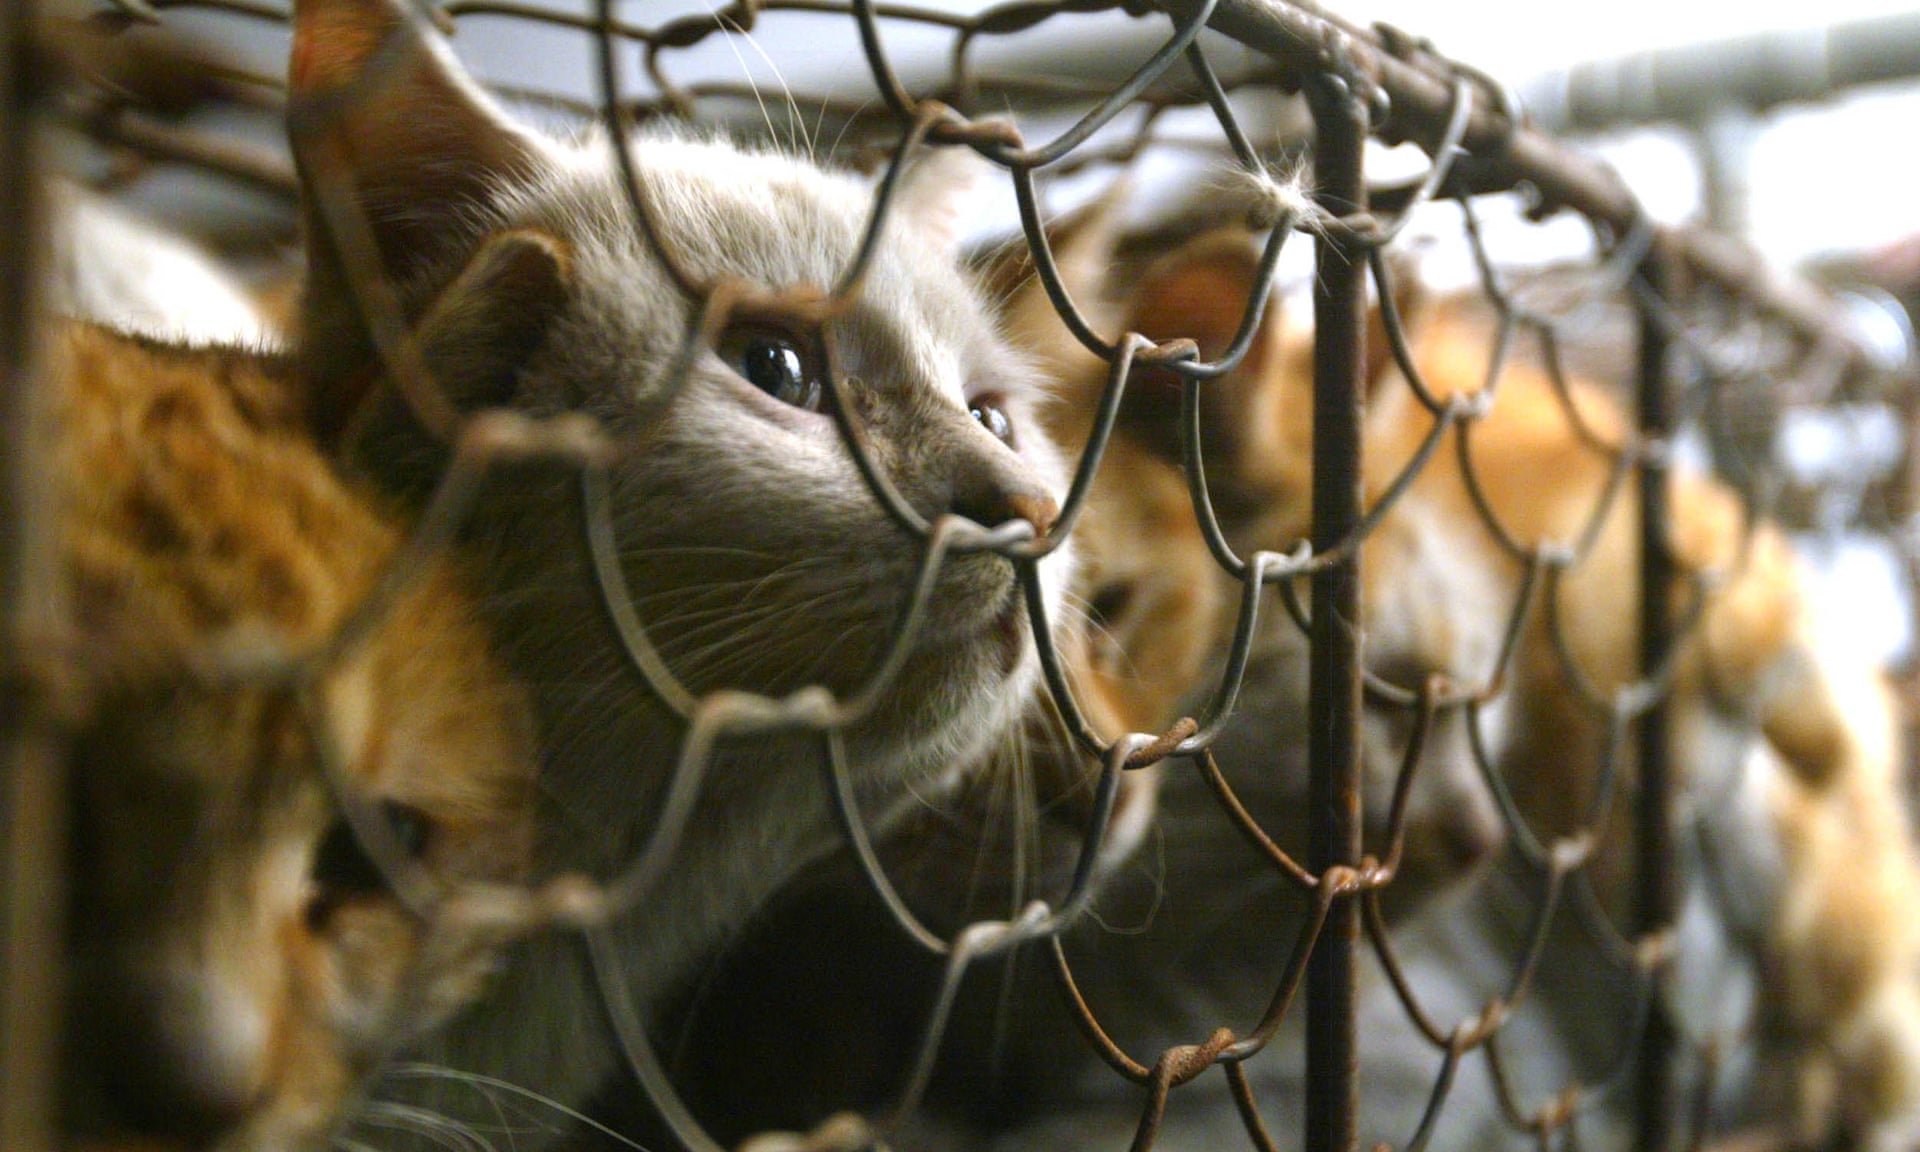 Taiwan bans dog and cat meat from table as attitudes change